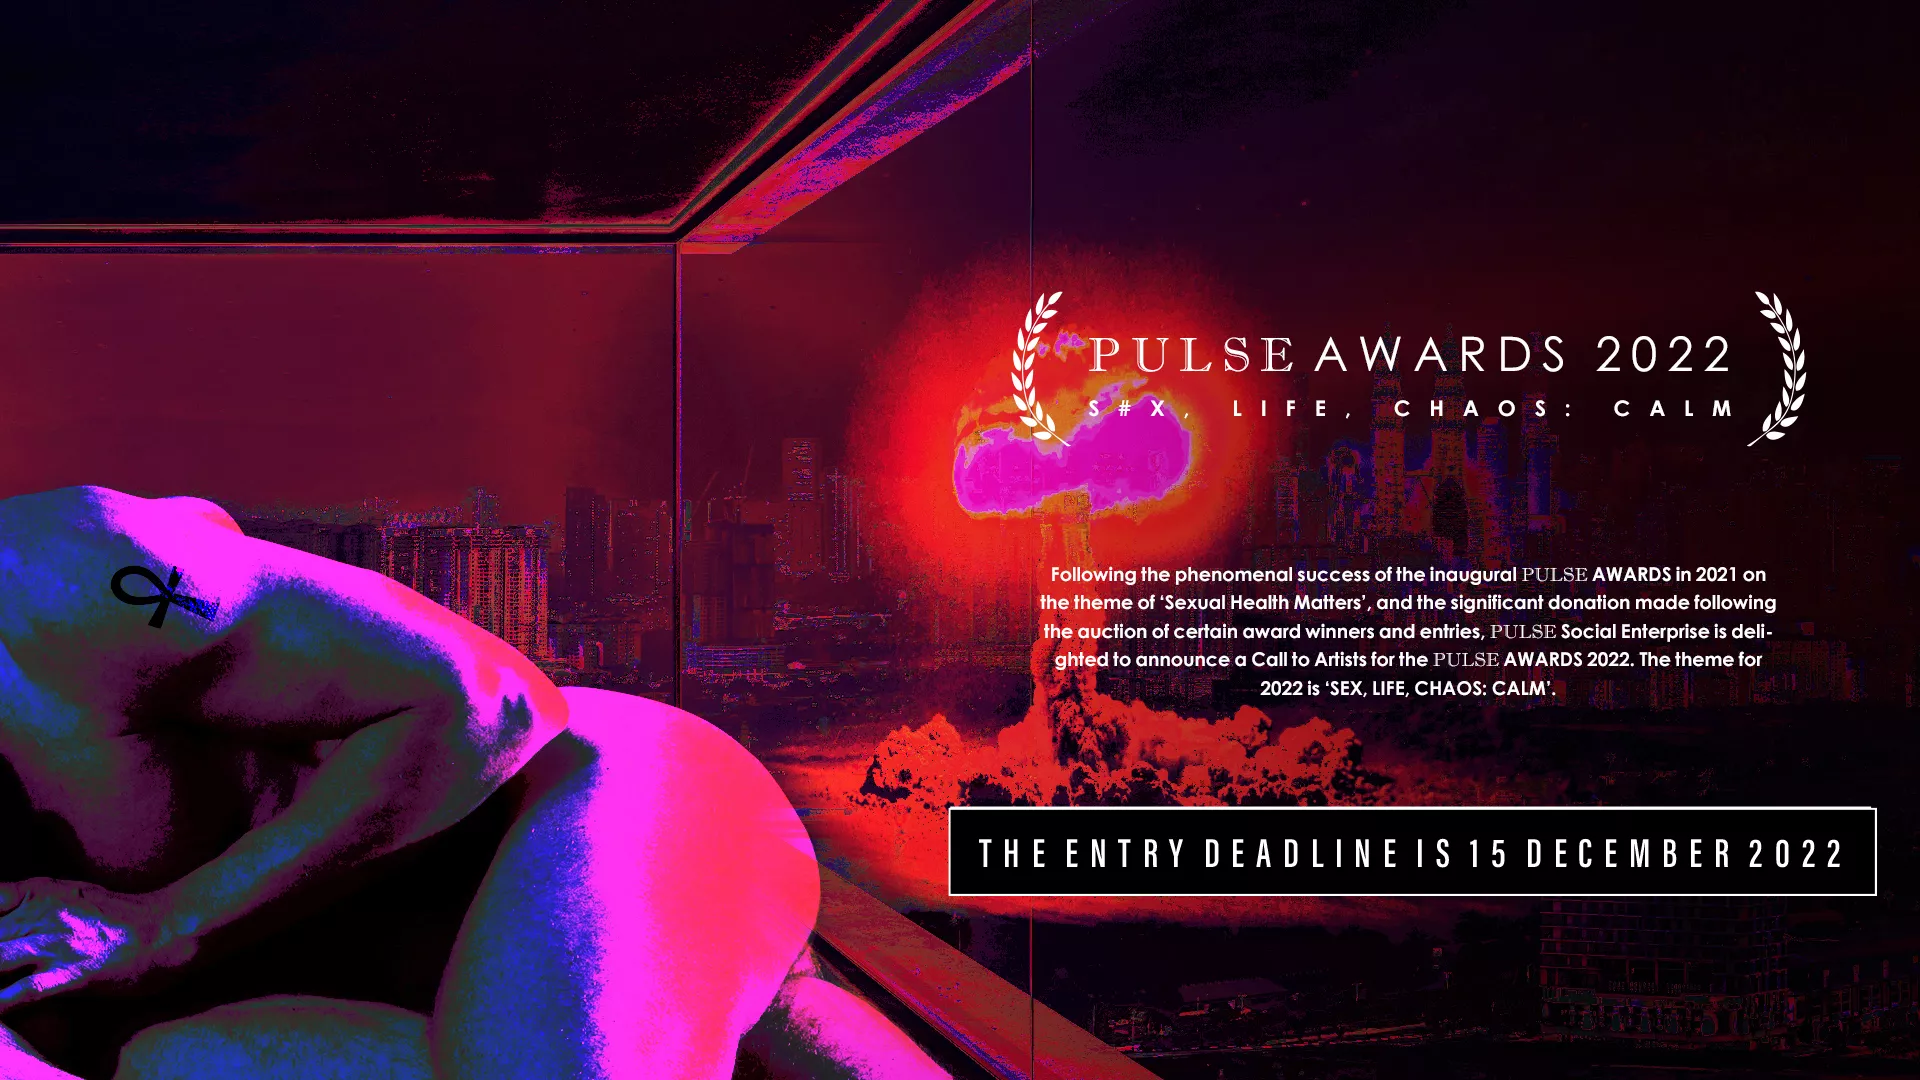 PULSE AWARDS 2022 - SUBMISSION GUIDELINES